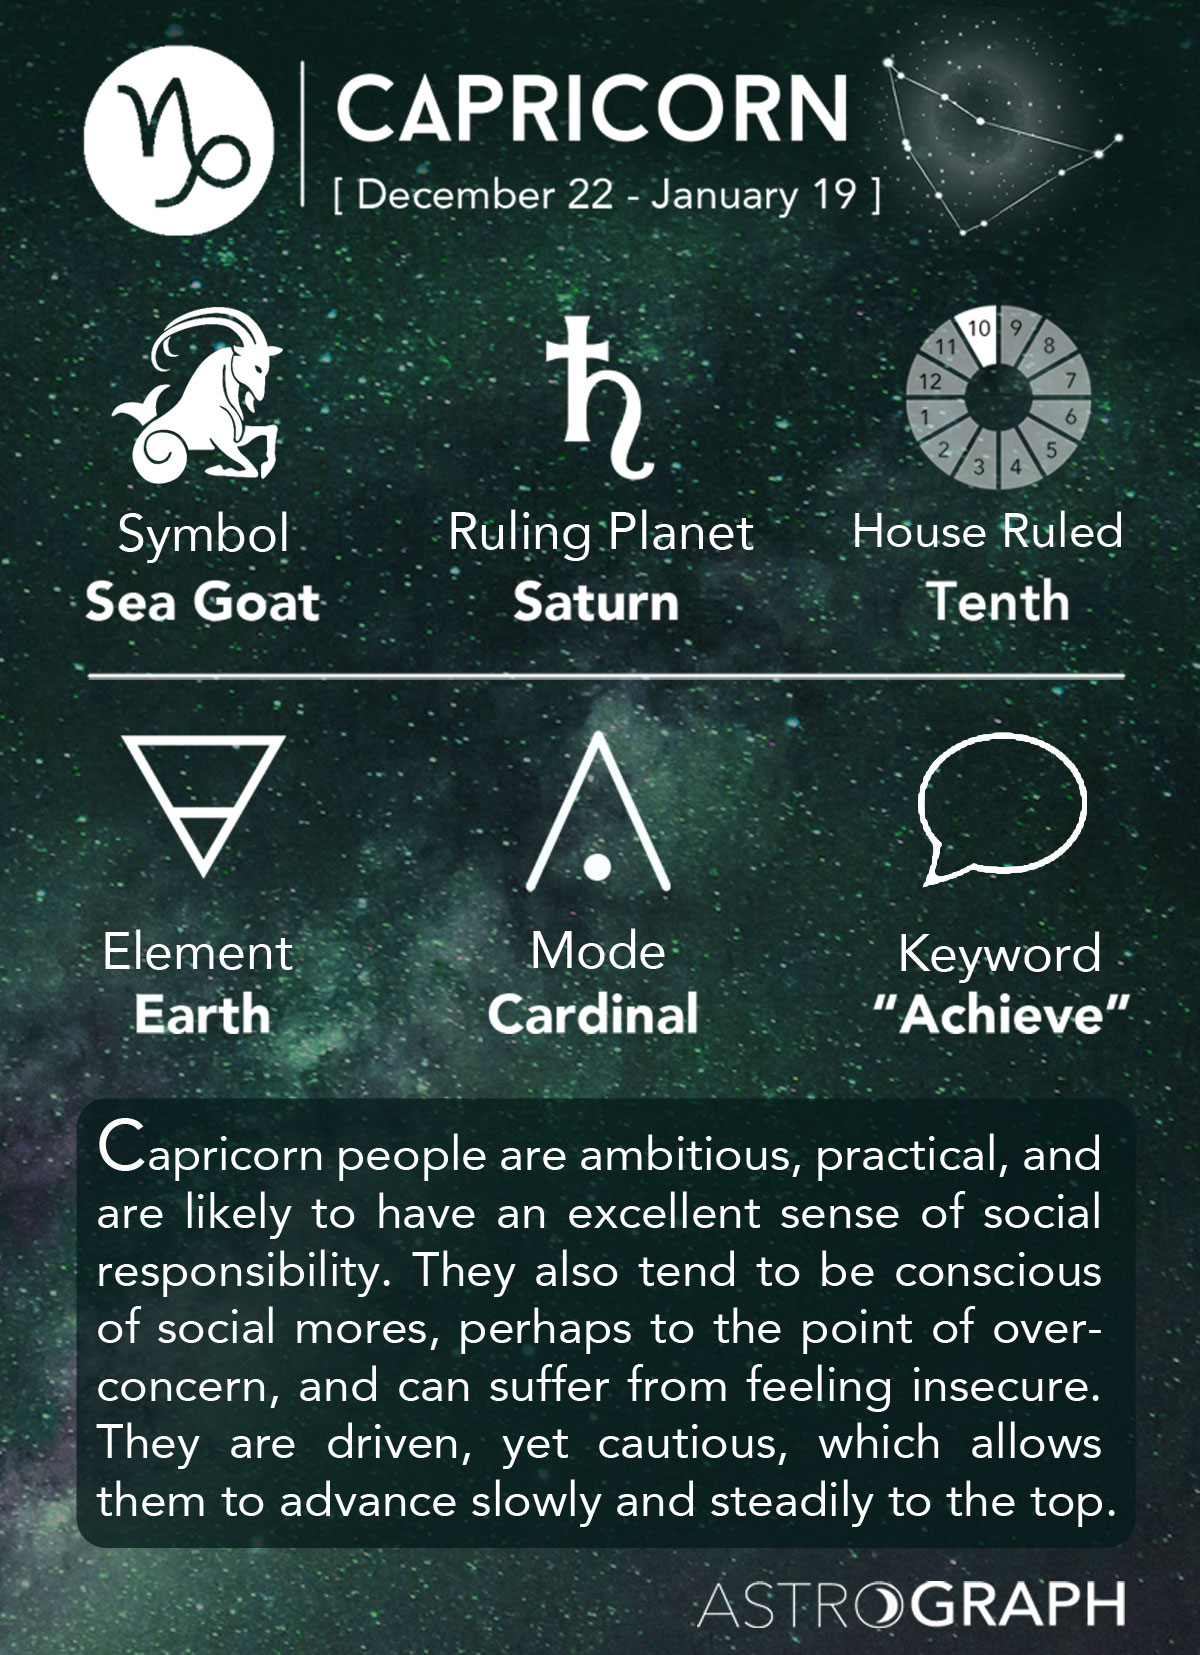 What is Capricorn enemy?